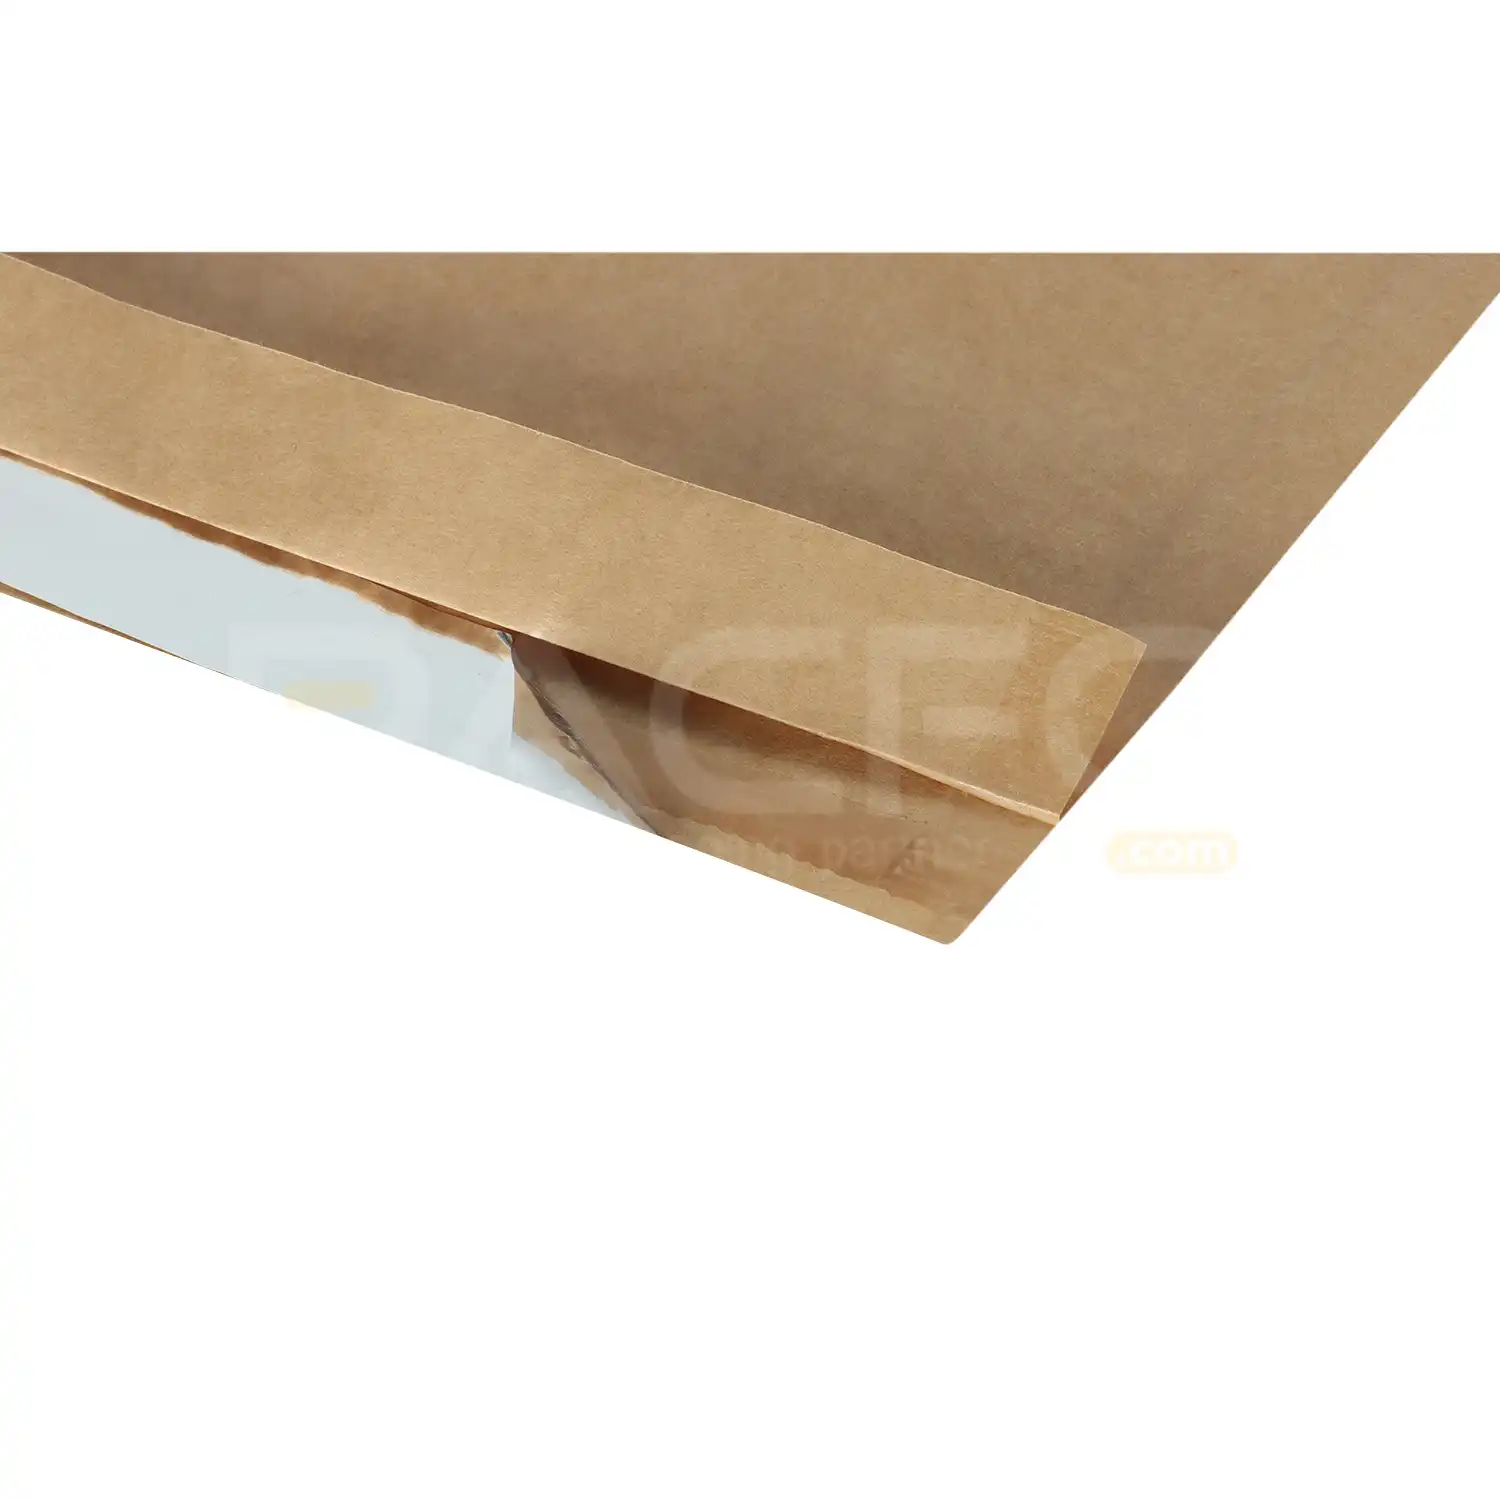 Brown Kraft Paper Mailer Bags 8 X 10 Inches